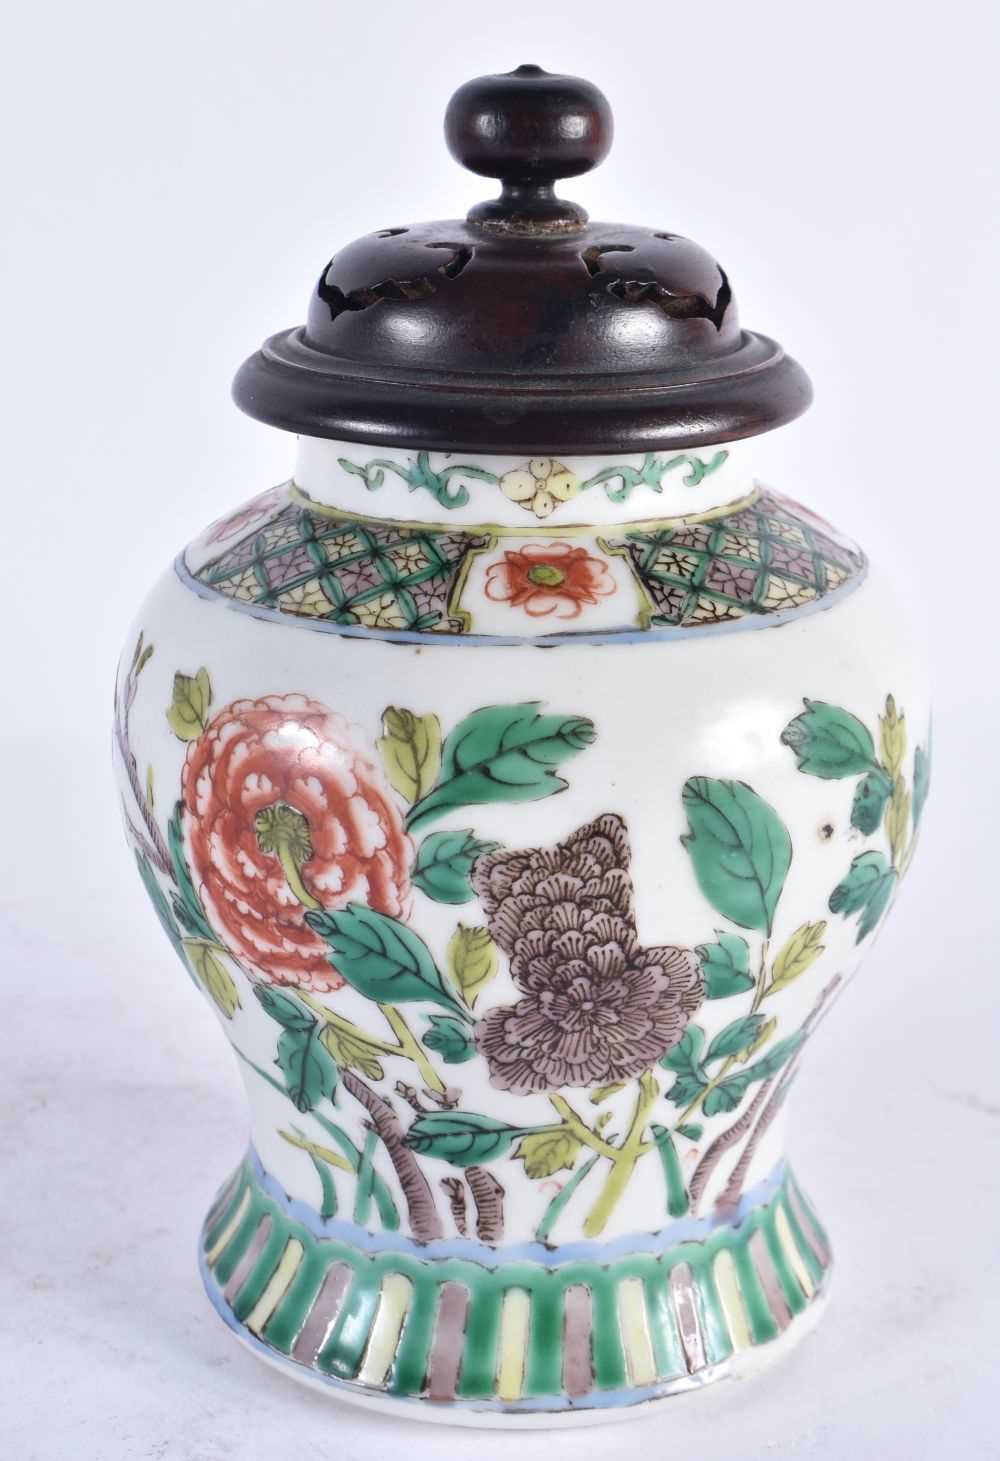 A PAIR OF 19TH CENTURY CHINESE FAMILLE VERTE PORCELAIN JARS Kangxi style. 17 cm high. - Image 6 of 8